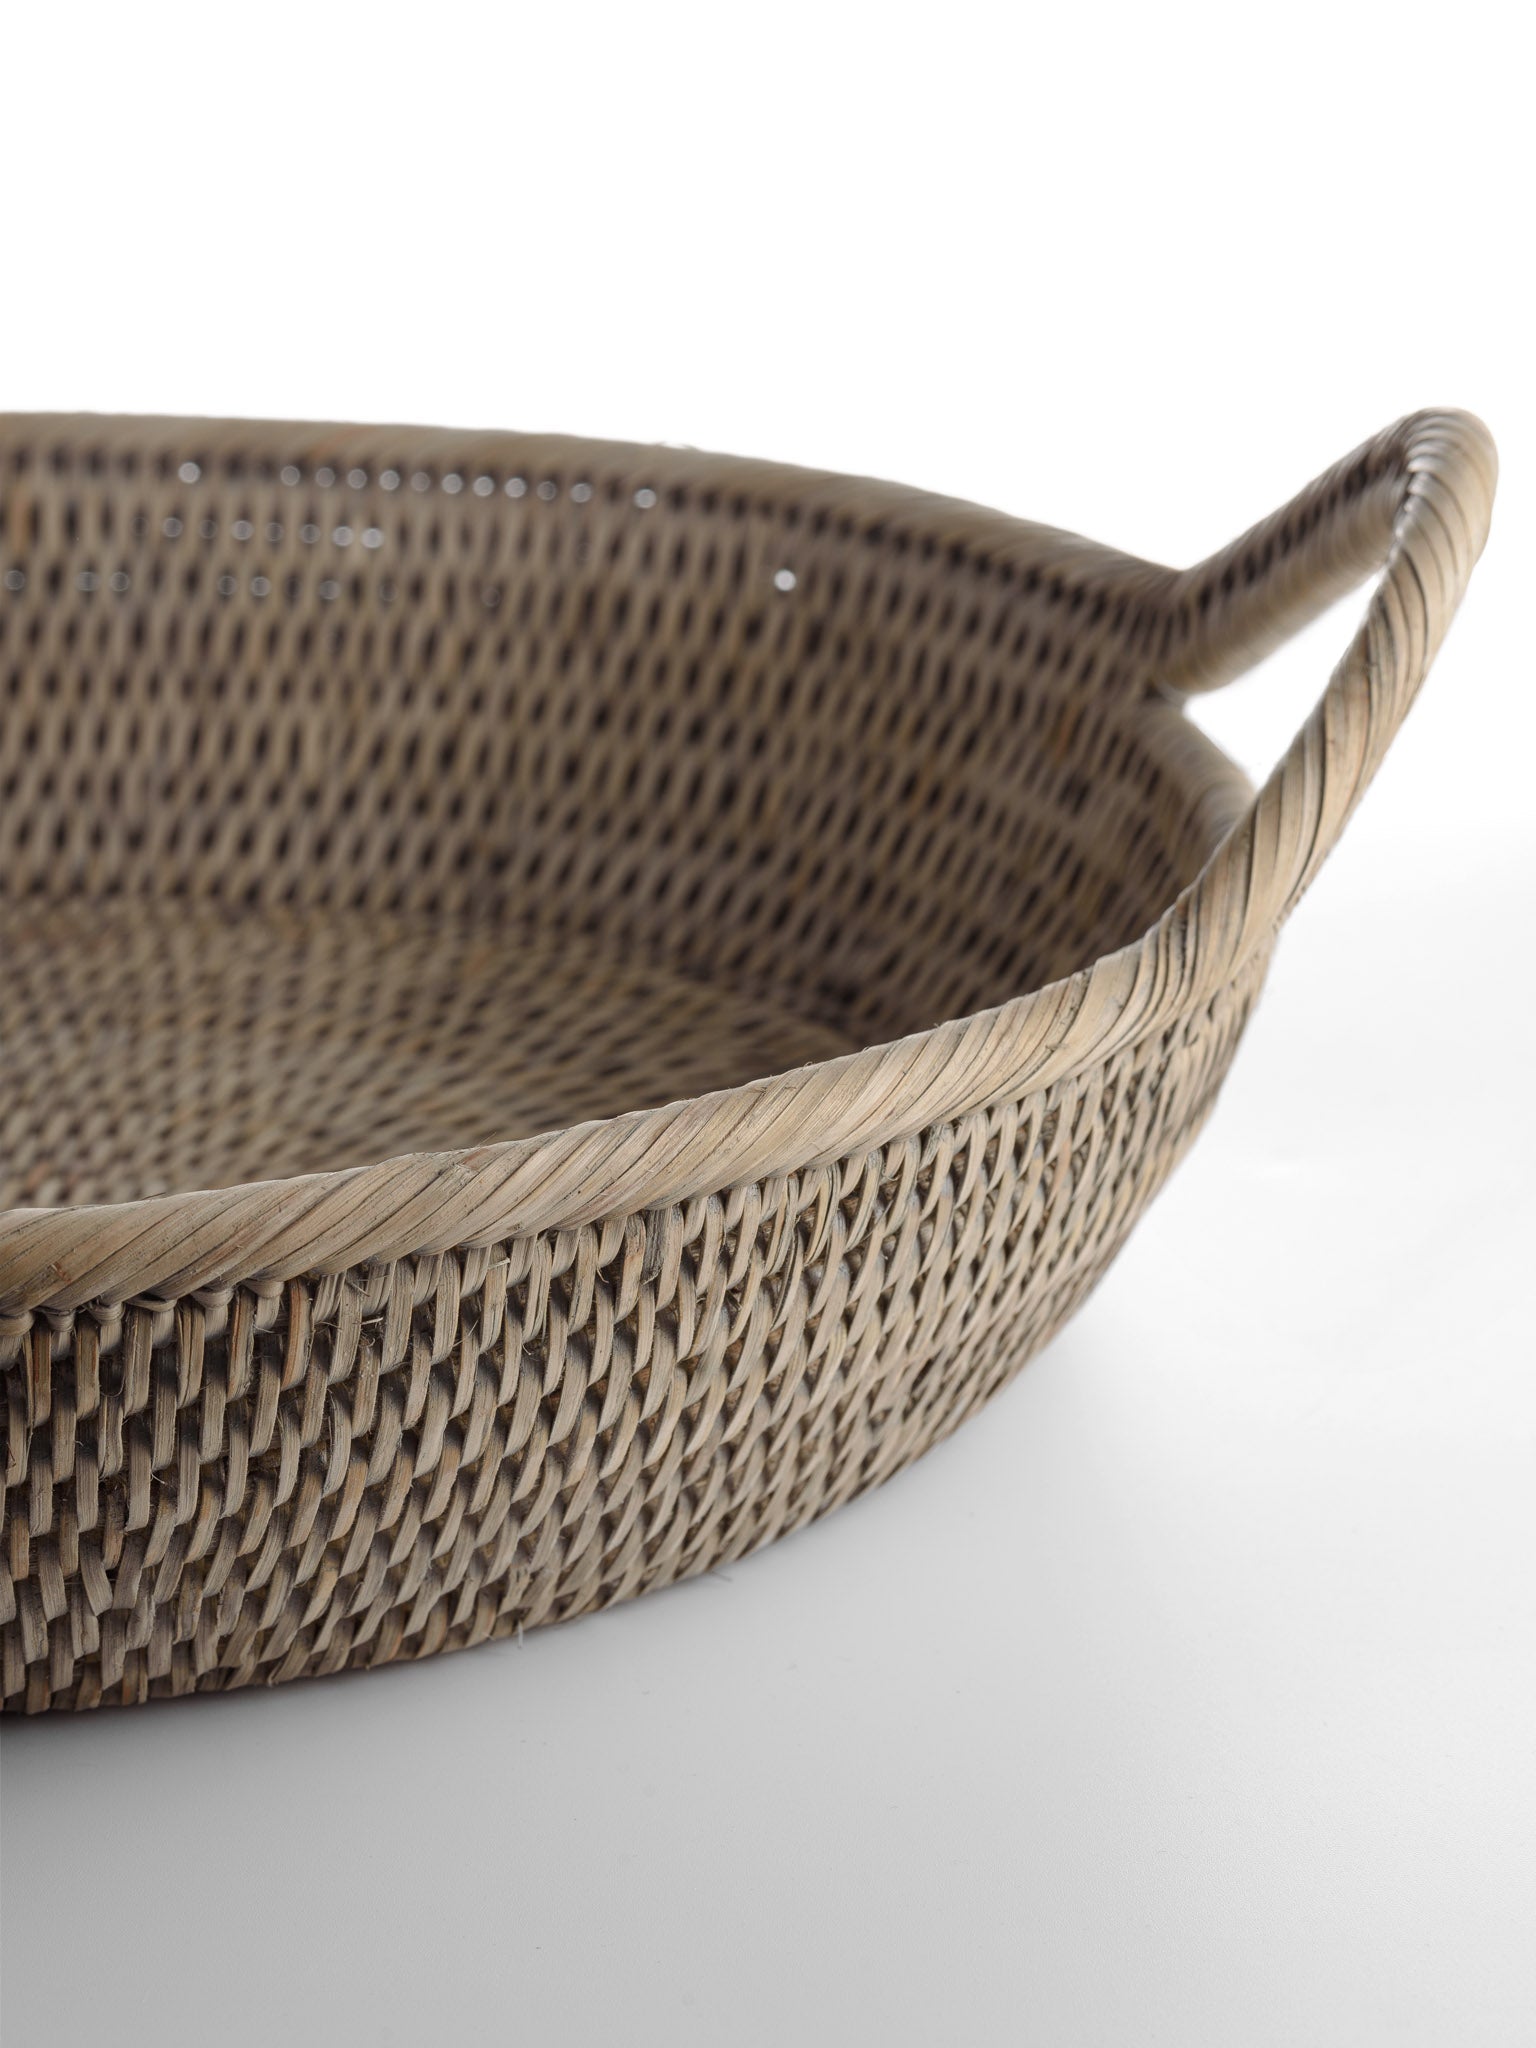 Rattan Tray Large Oval